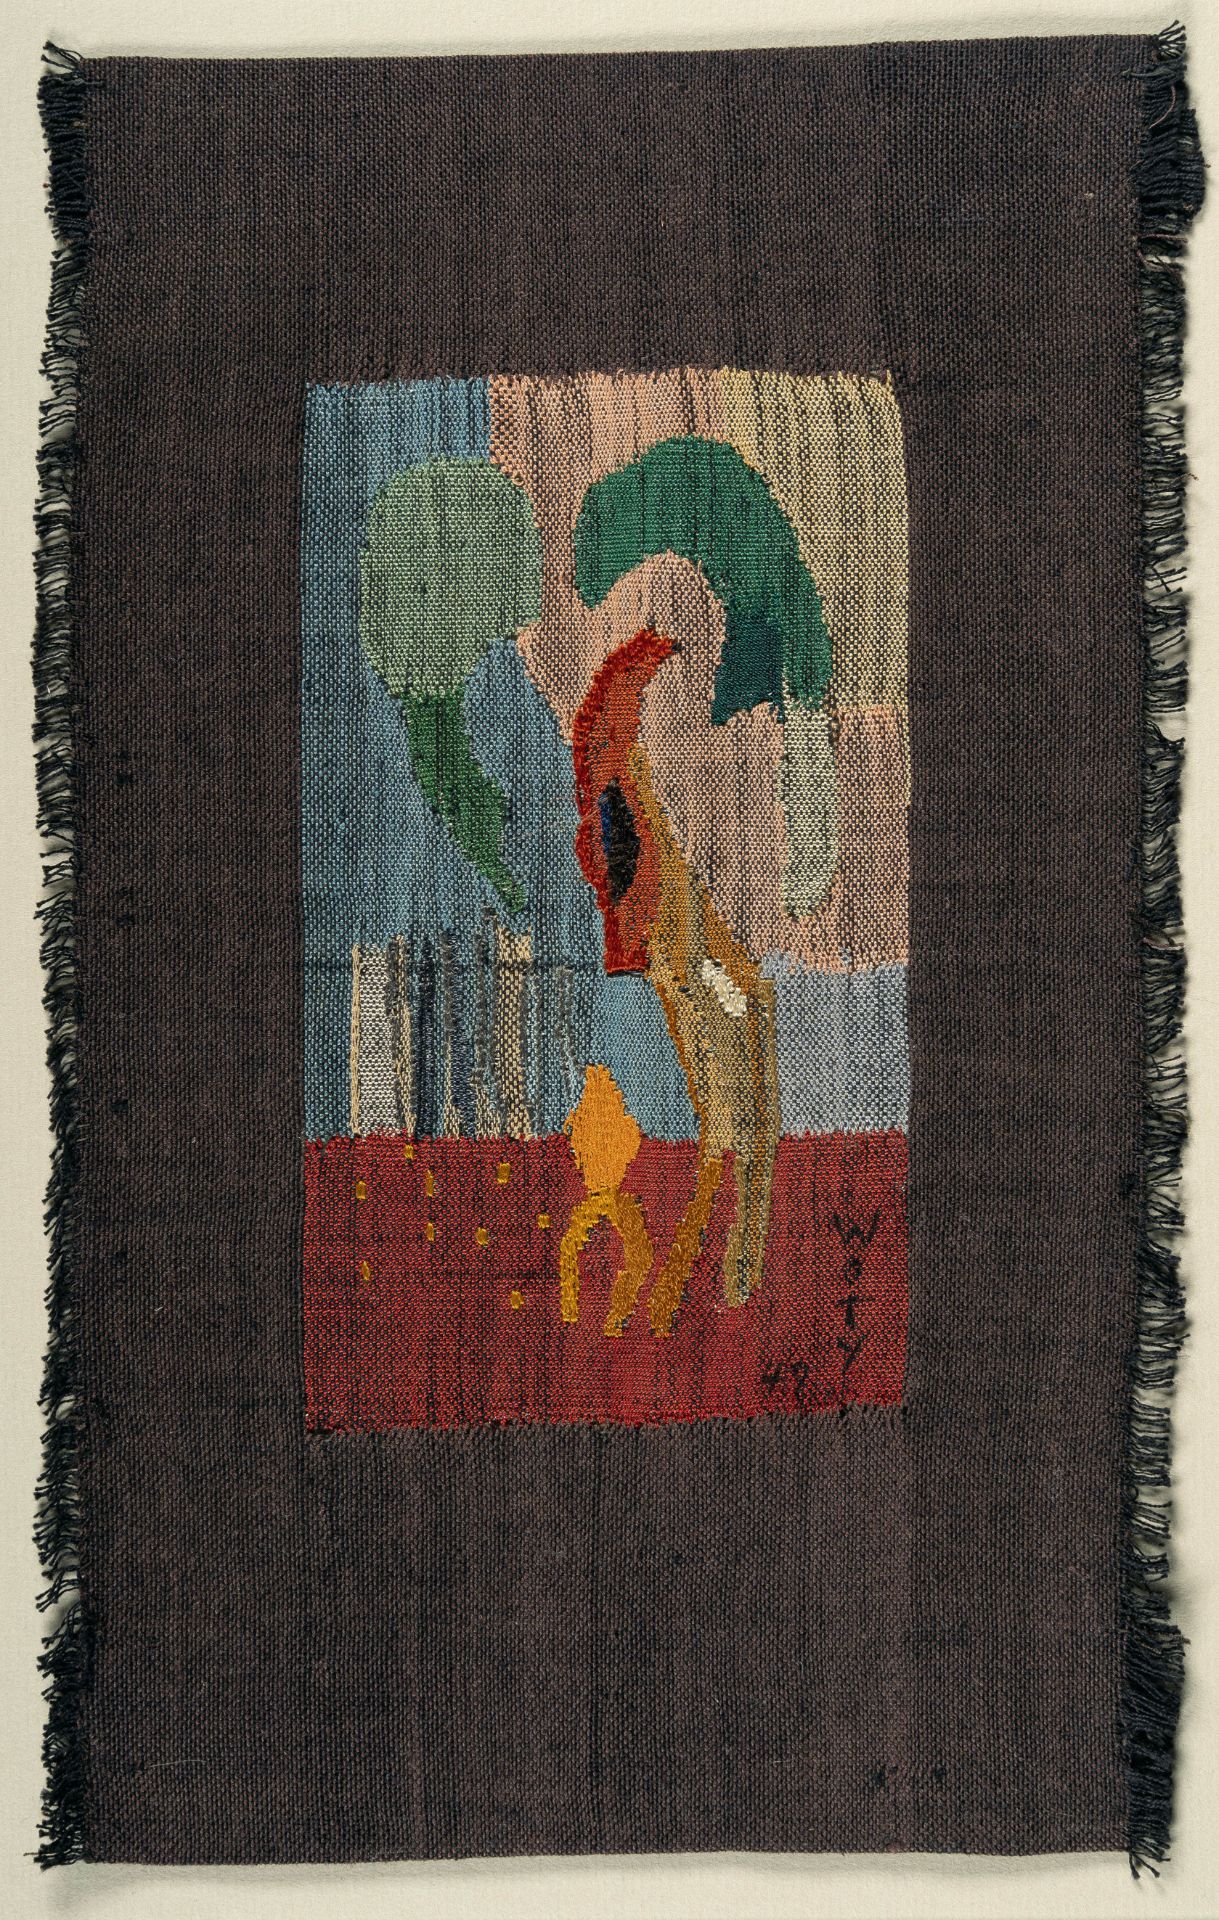 Woty Werner, The youngest.Woven wool. (19)49. Ca. 30.5 x 19.5 cm. Signed and dated lower right. - Image 2 of 3